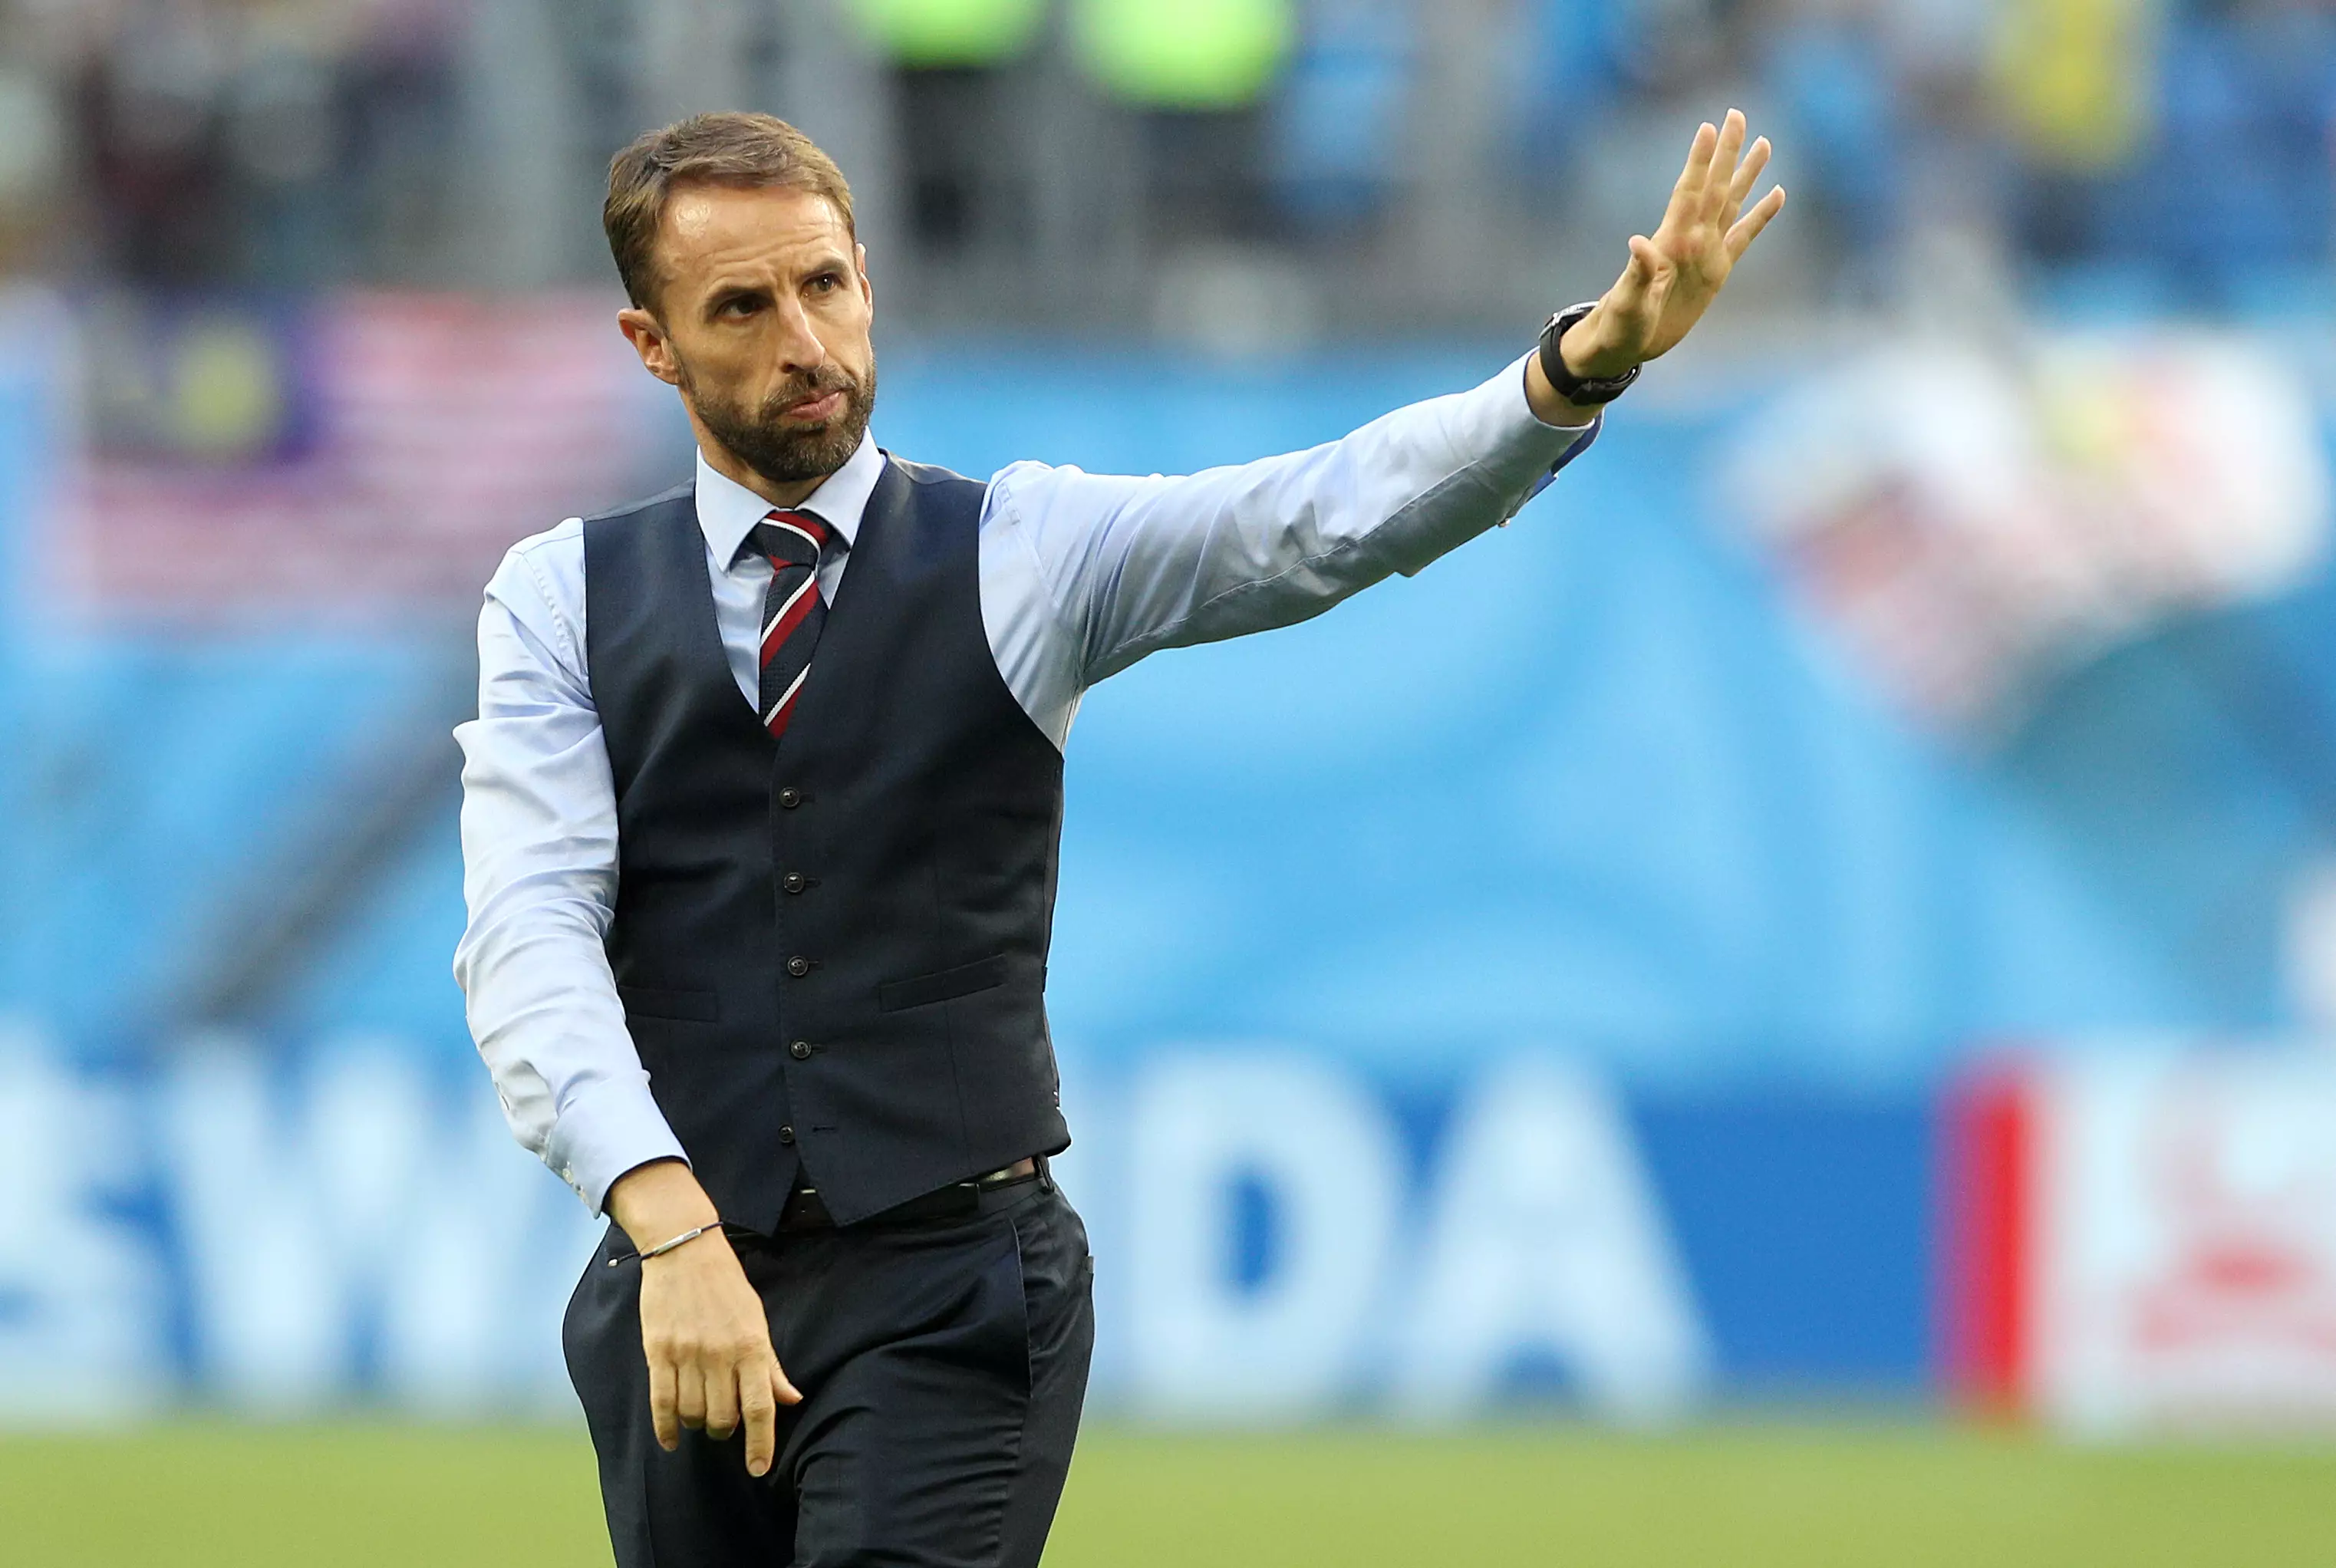 Southgate waves goodbye to the traveling England support. Image: PA